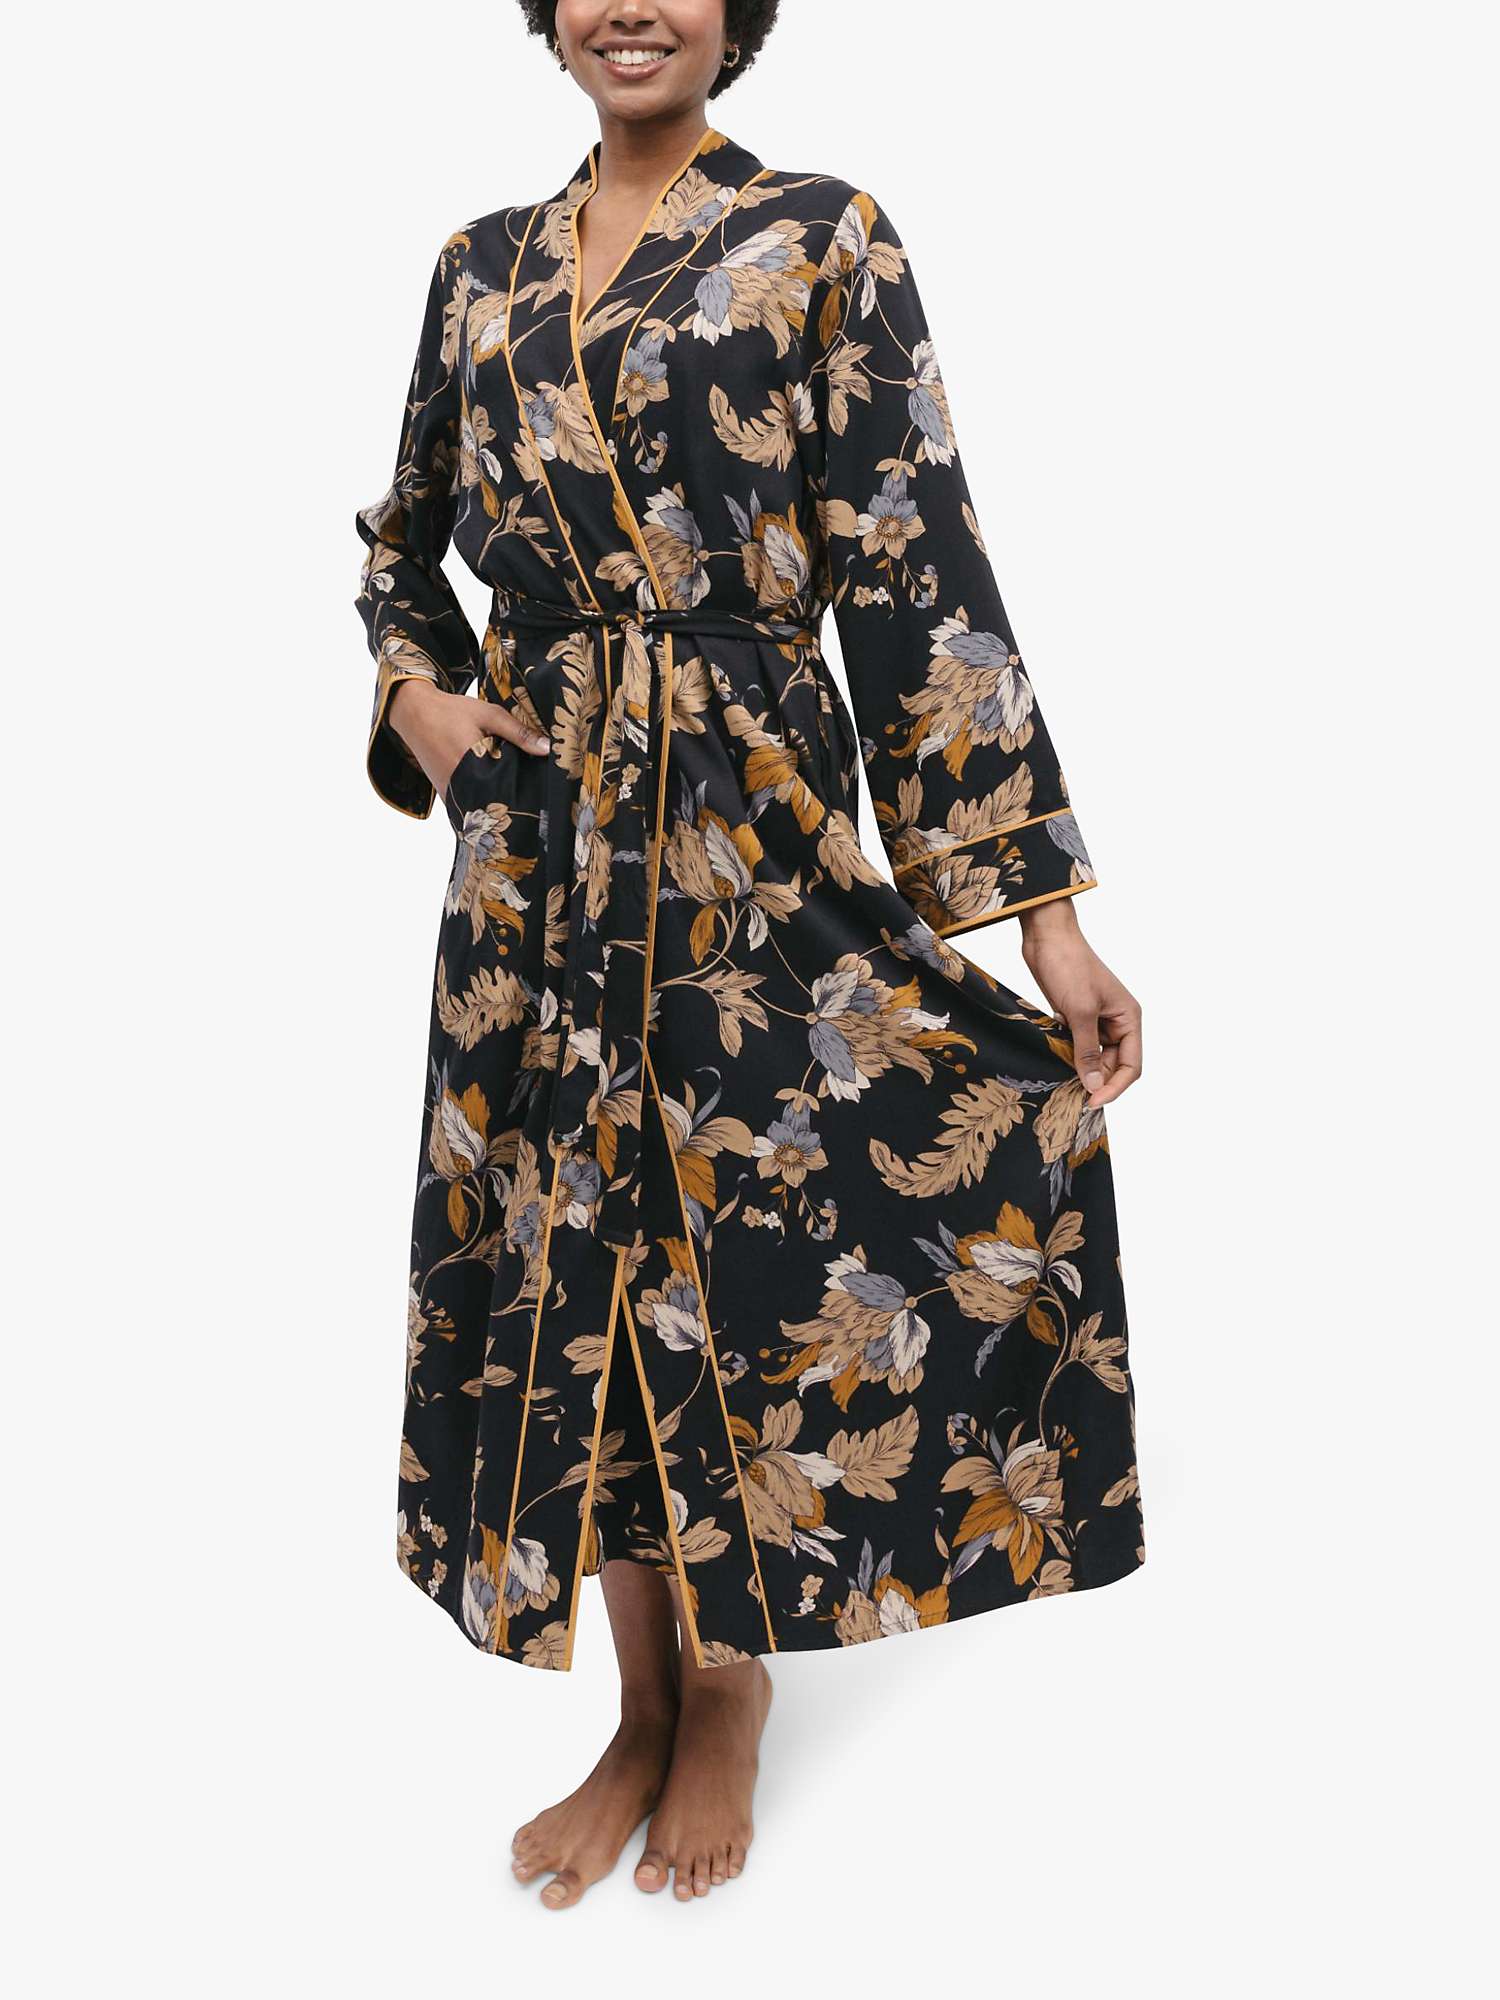 Buy Fable & Eve Brixton Floral Print Long Dressing Gown, Black/Multi Online at johnlewis.com